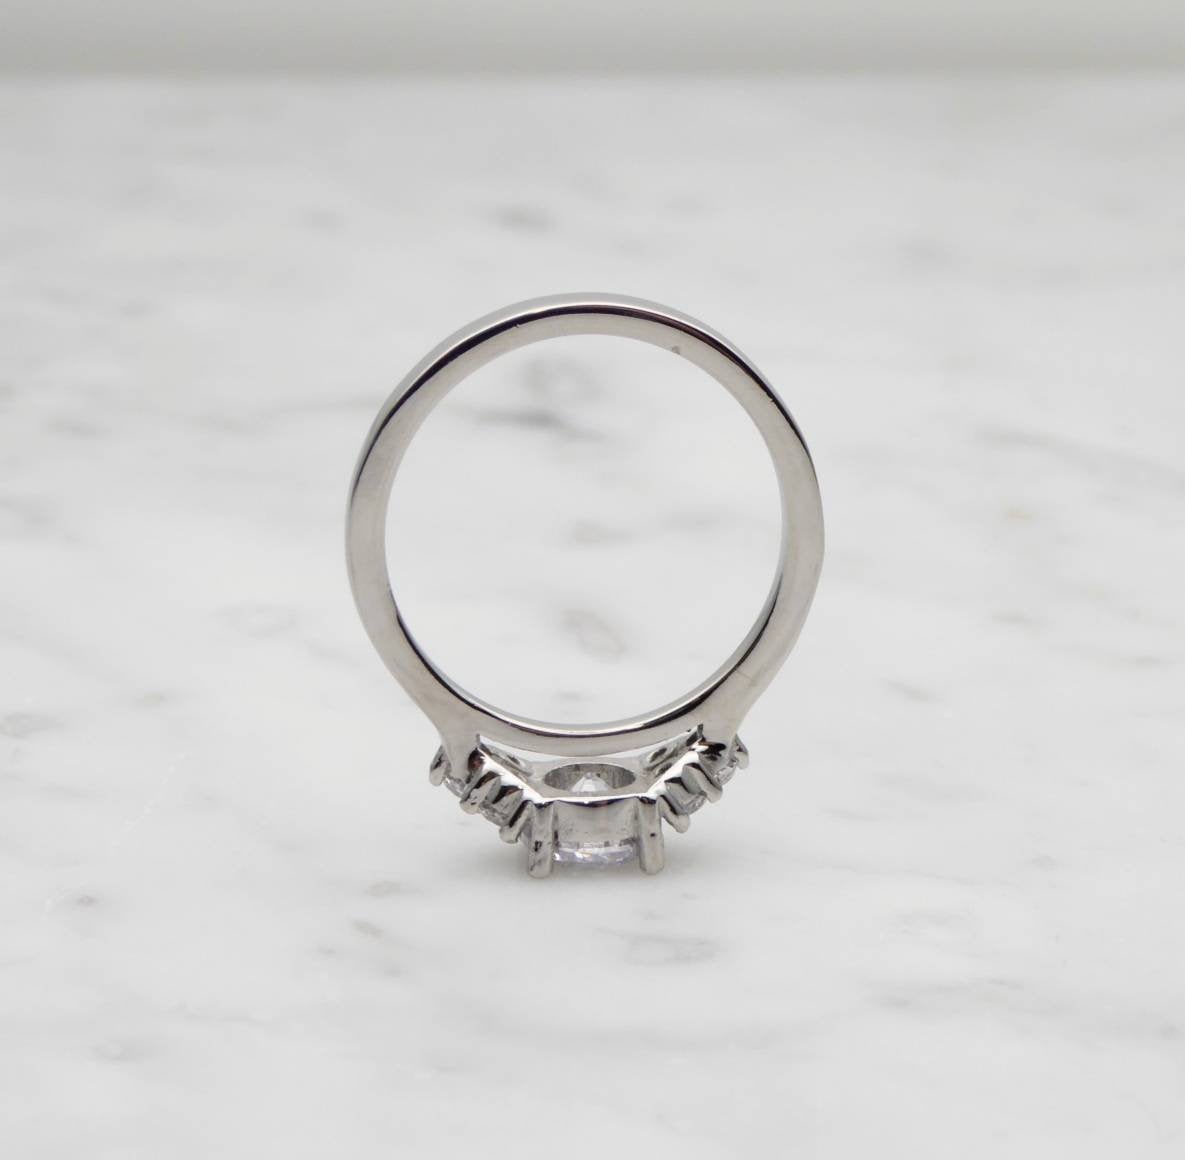 Man Made Diamond Simulant ring available in white gold or Titanium - engagement ring - wedding ring